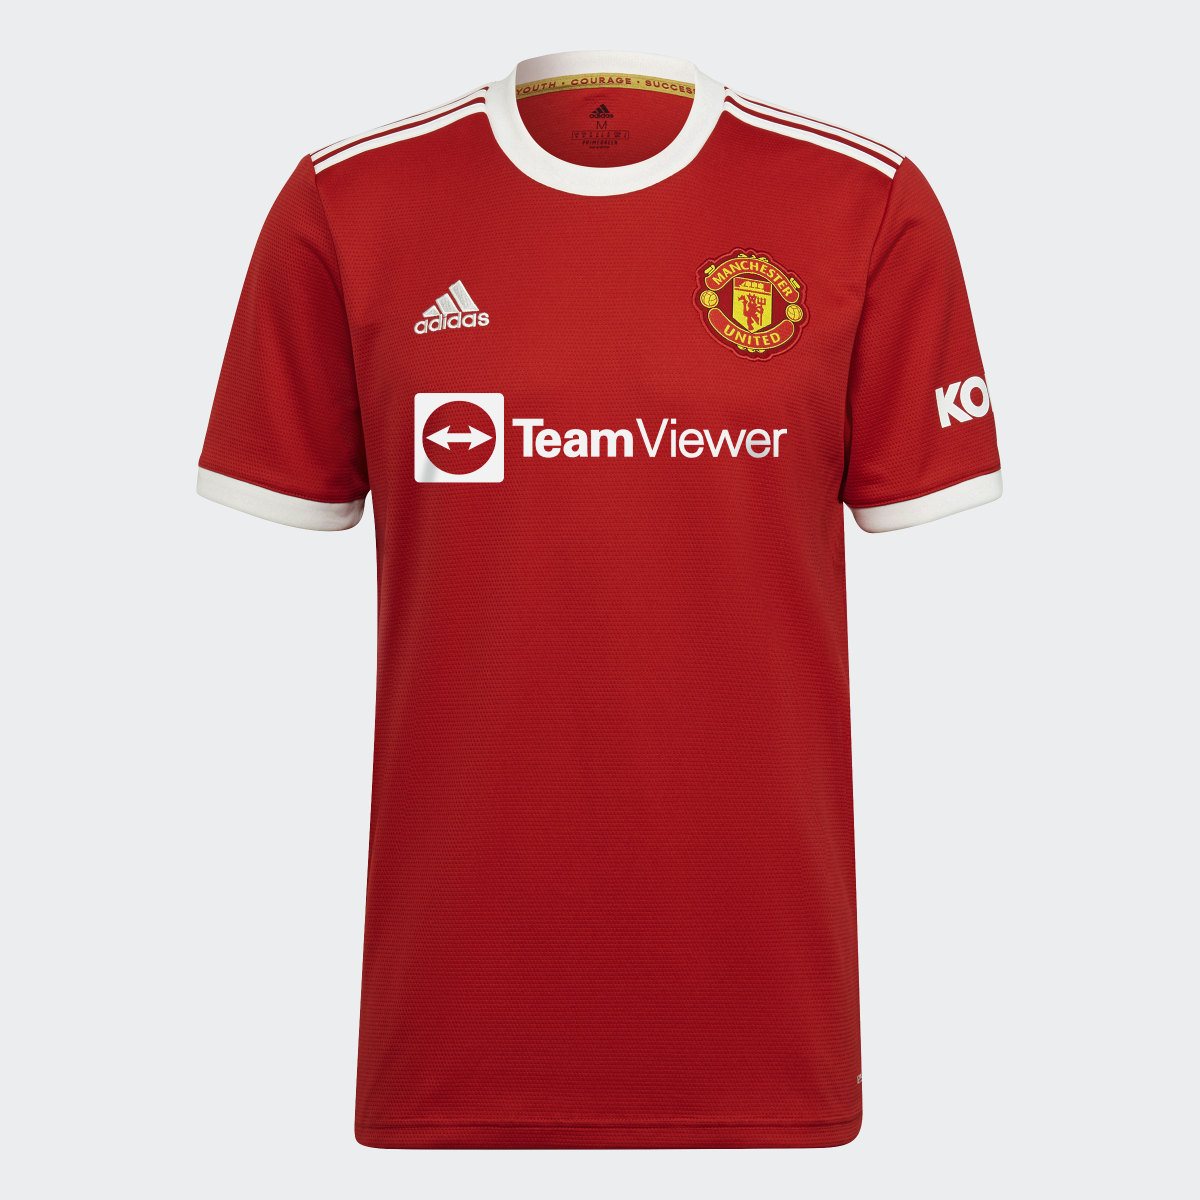 Adidas Manchester United 21/22 Home Jersey. 5